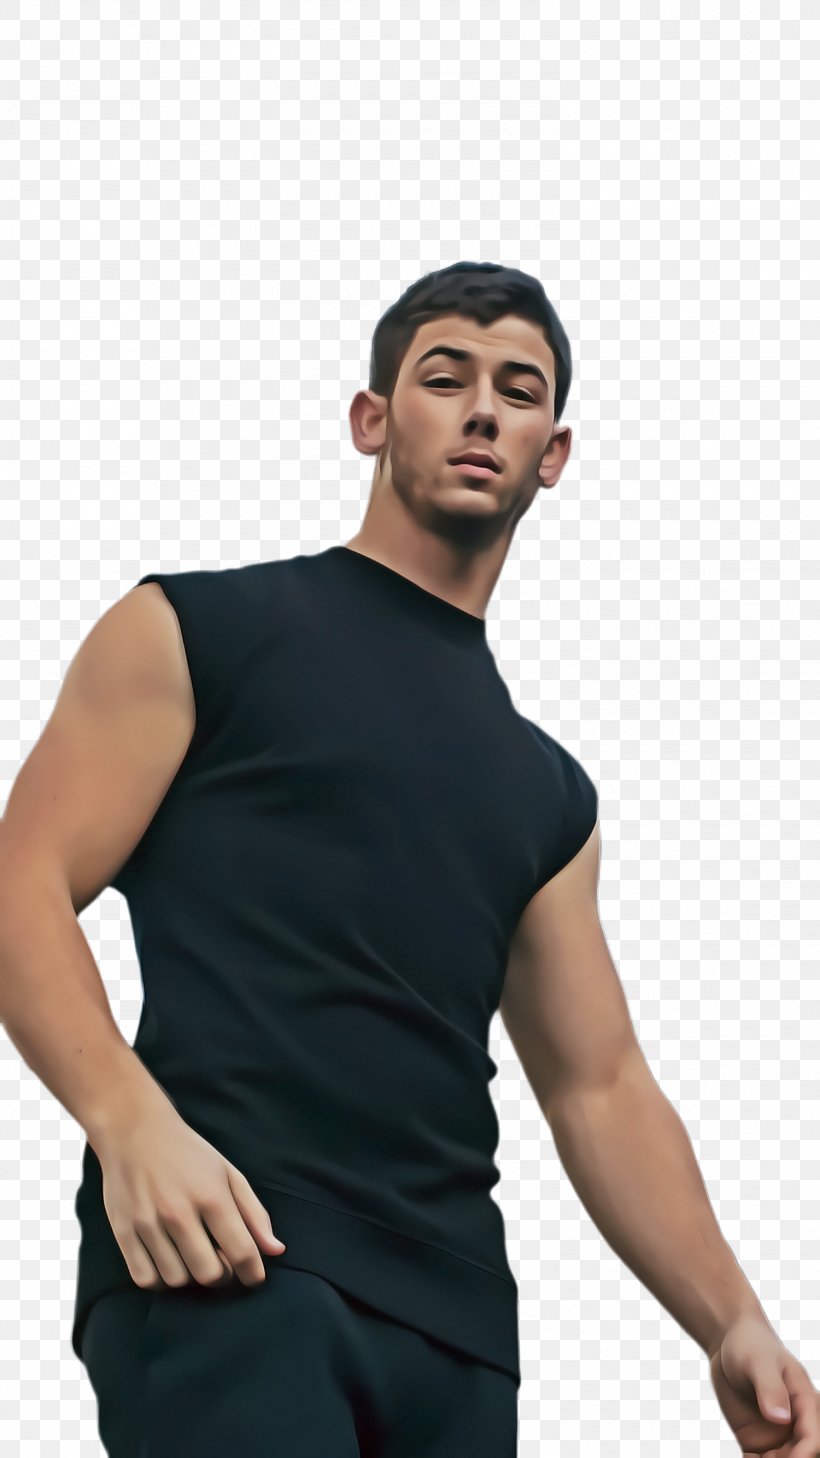 Clothing Black T-shirt Neck Arm, PNG, 1500x2668px, Clothing, Arm, Black, Muscle, Neck Download Free